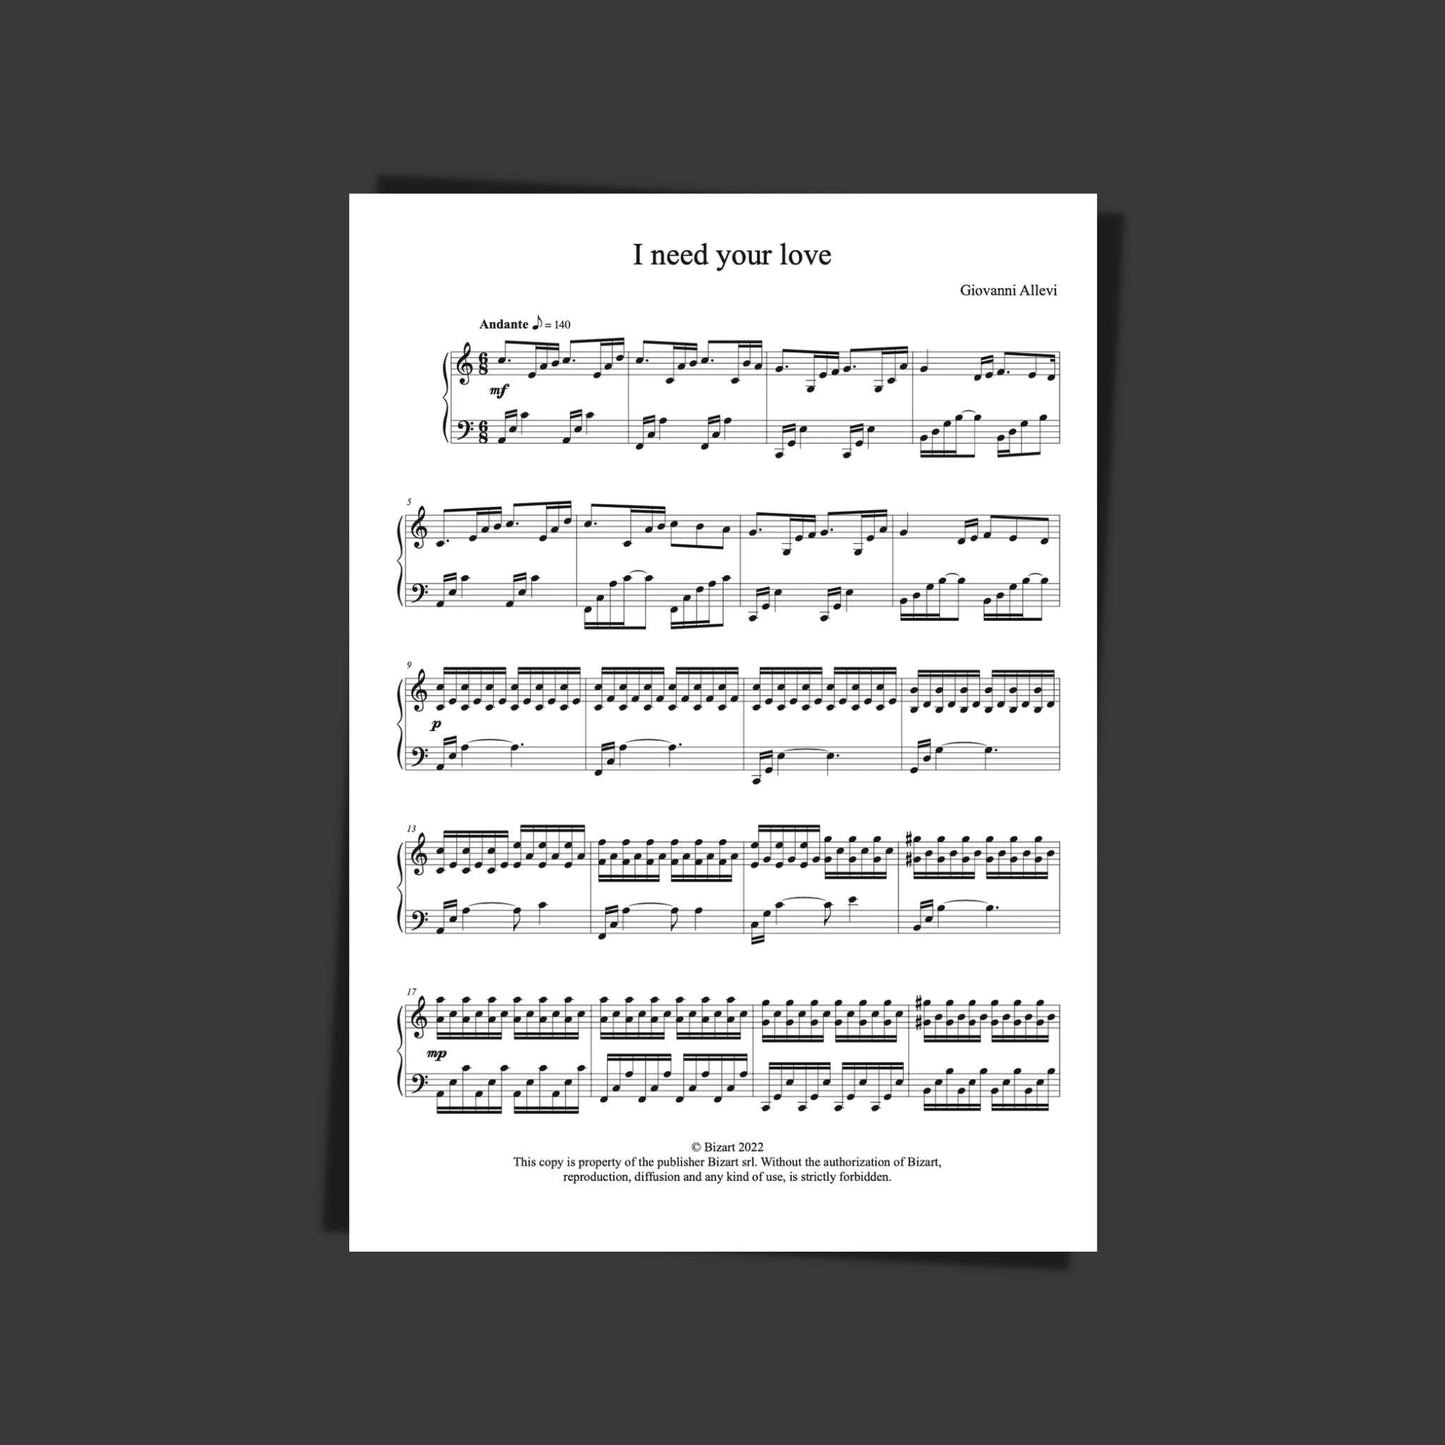 I NEED YOUR LOVE  by composer and pianist GIOVANNI ALLEVI - digital sheet music opening